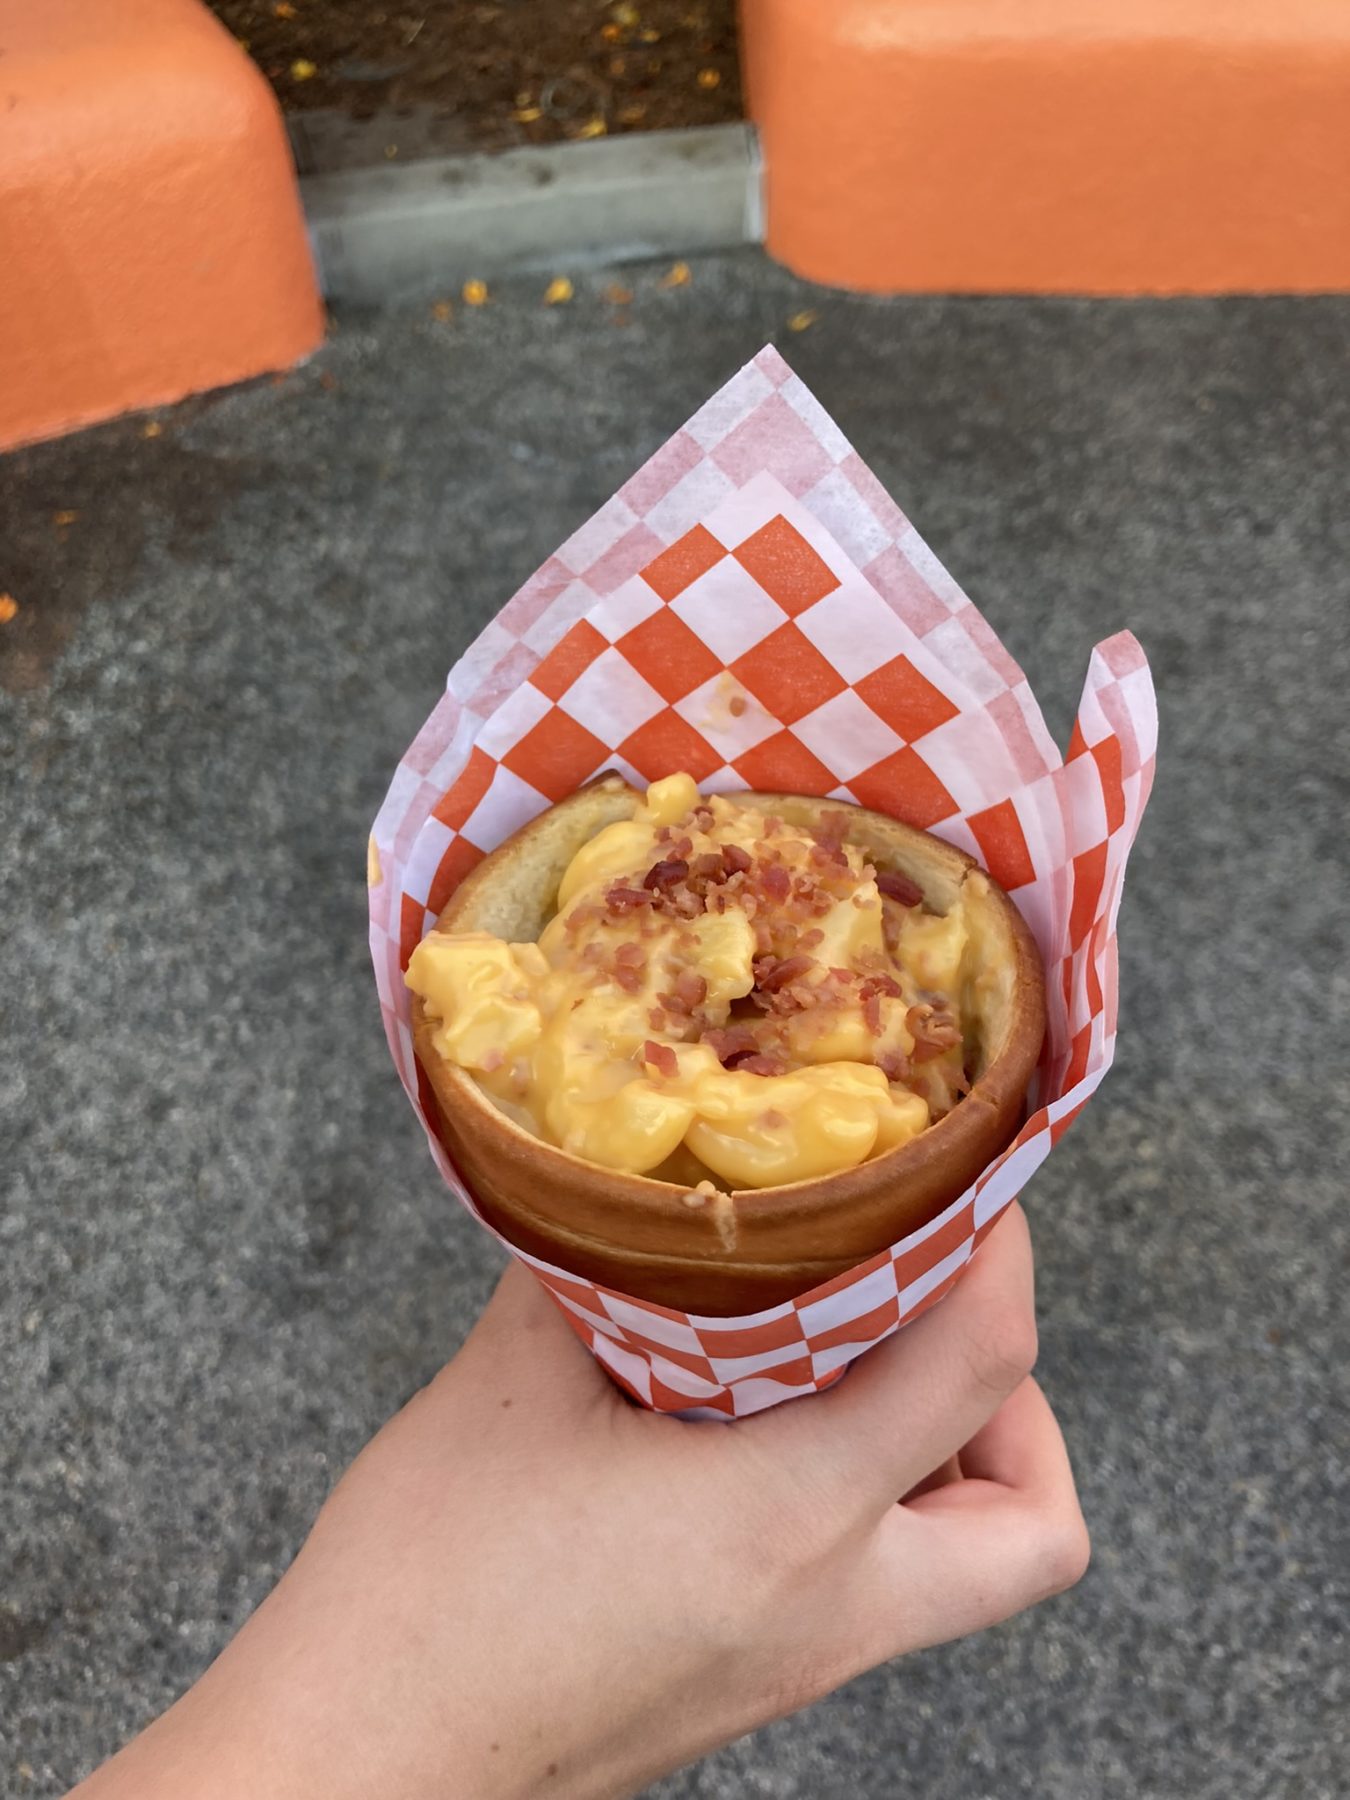 Best snacks and food at California Adventure- Mac and Cheese Cones